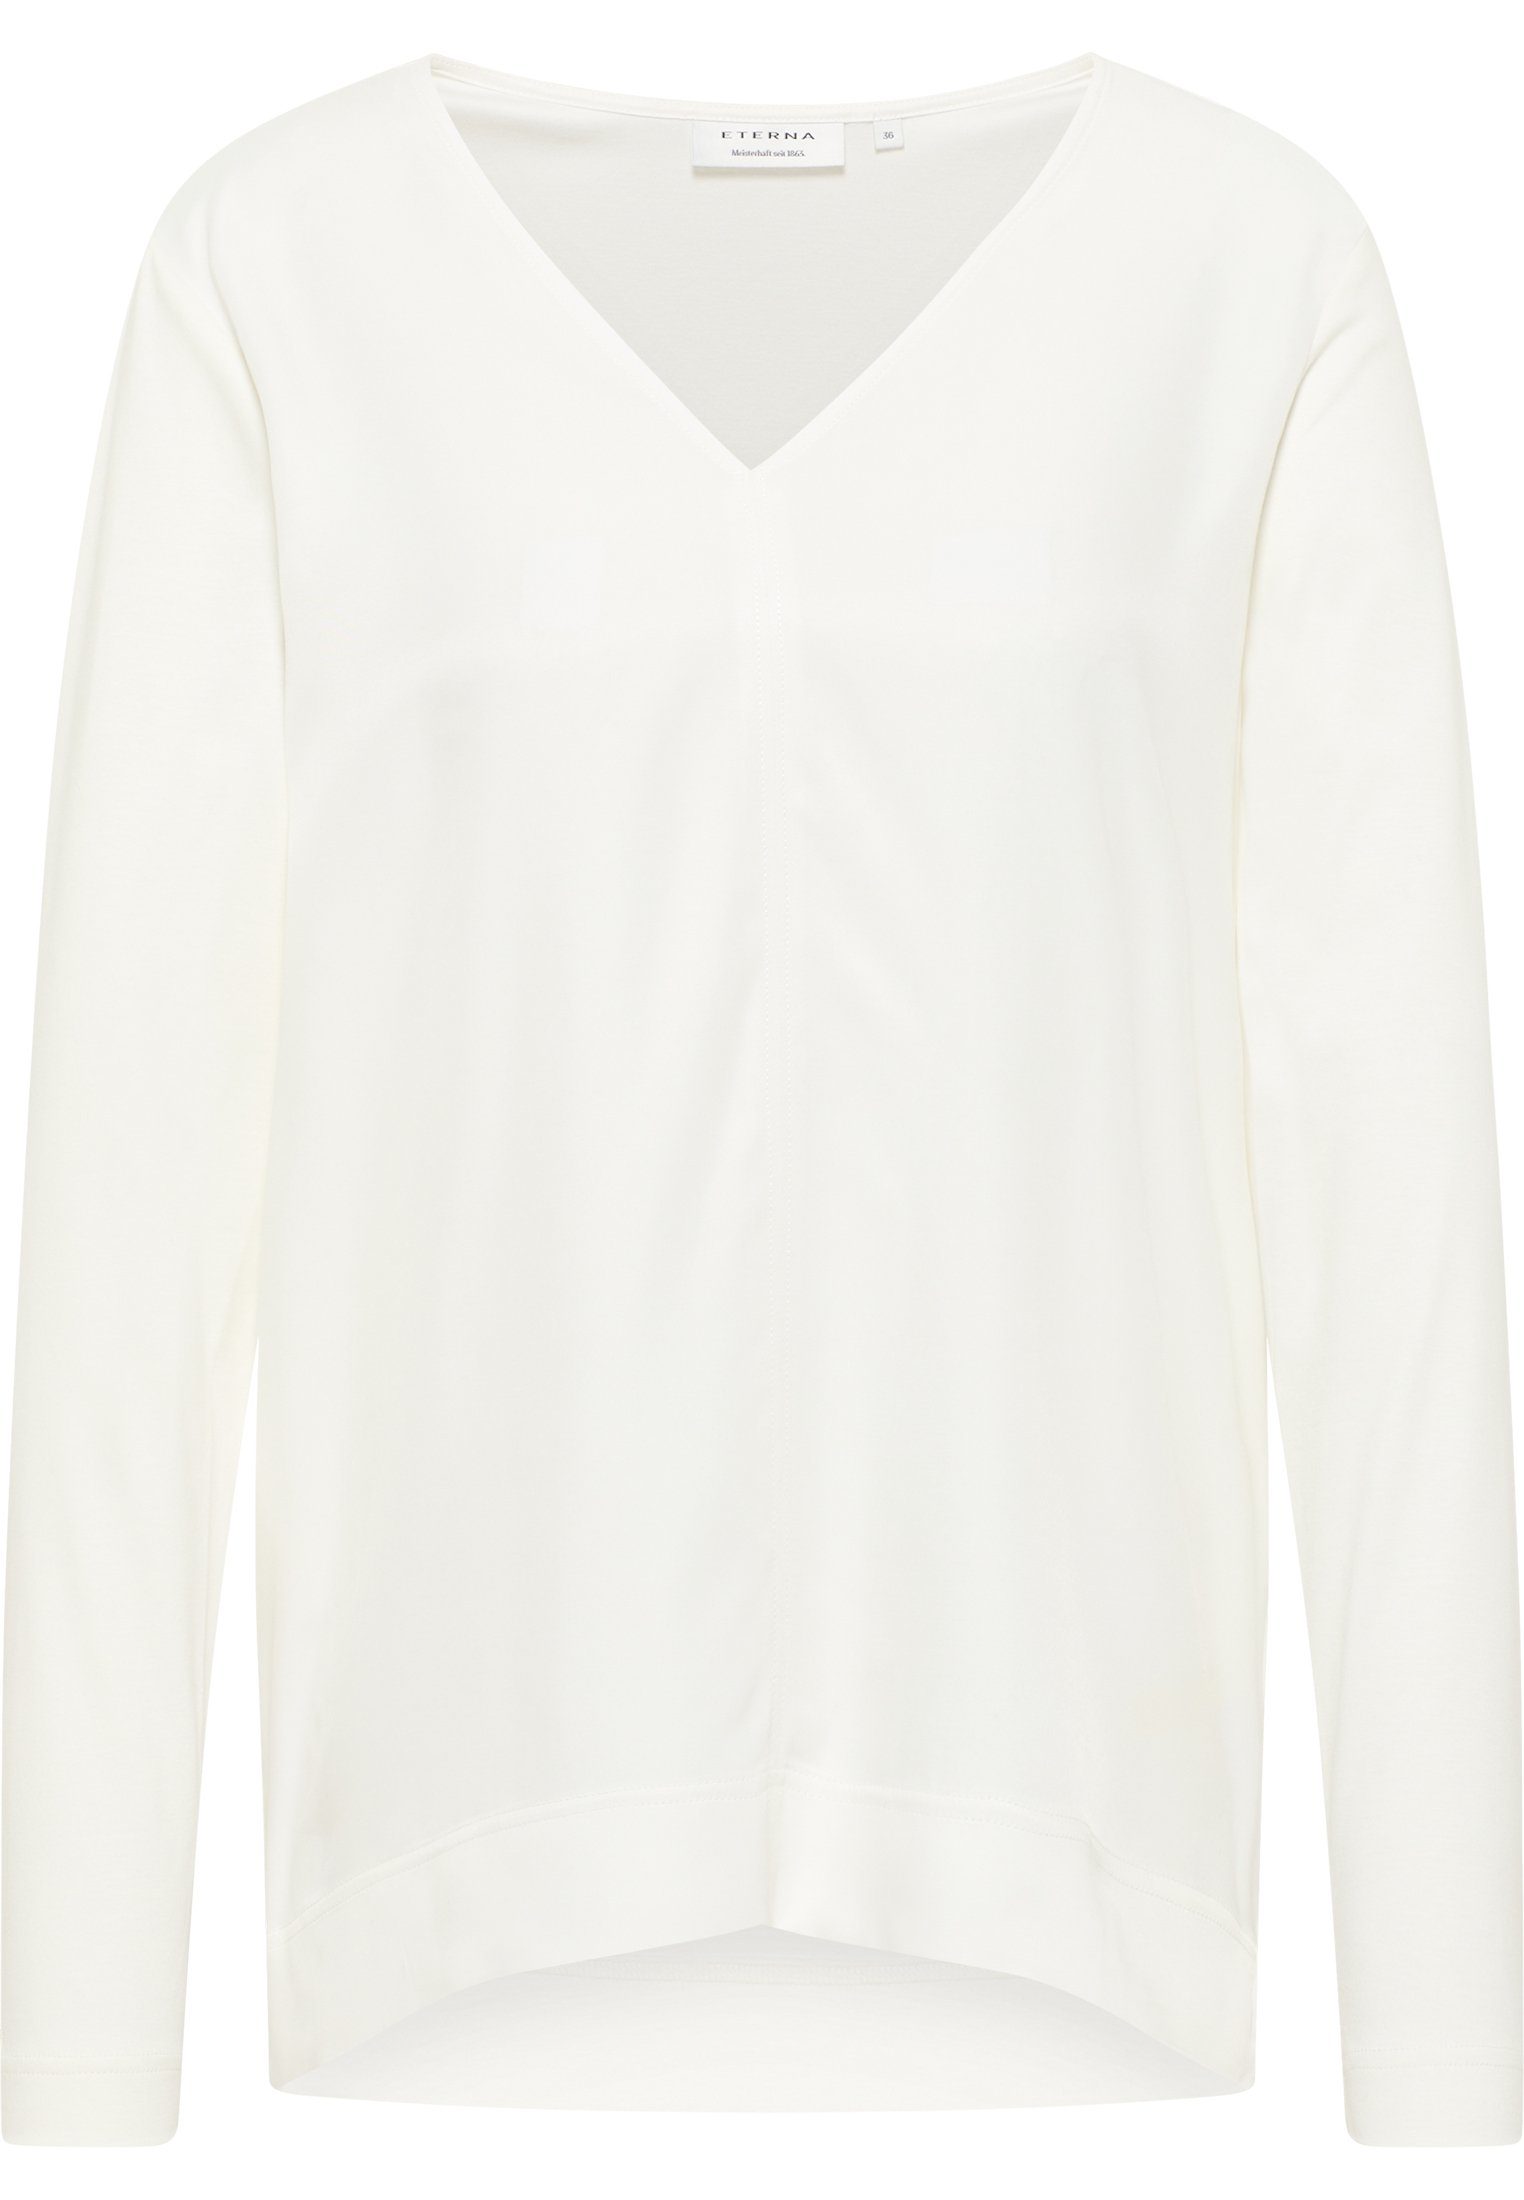 Eterna Shirtbluse off-white LOOSE FIT